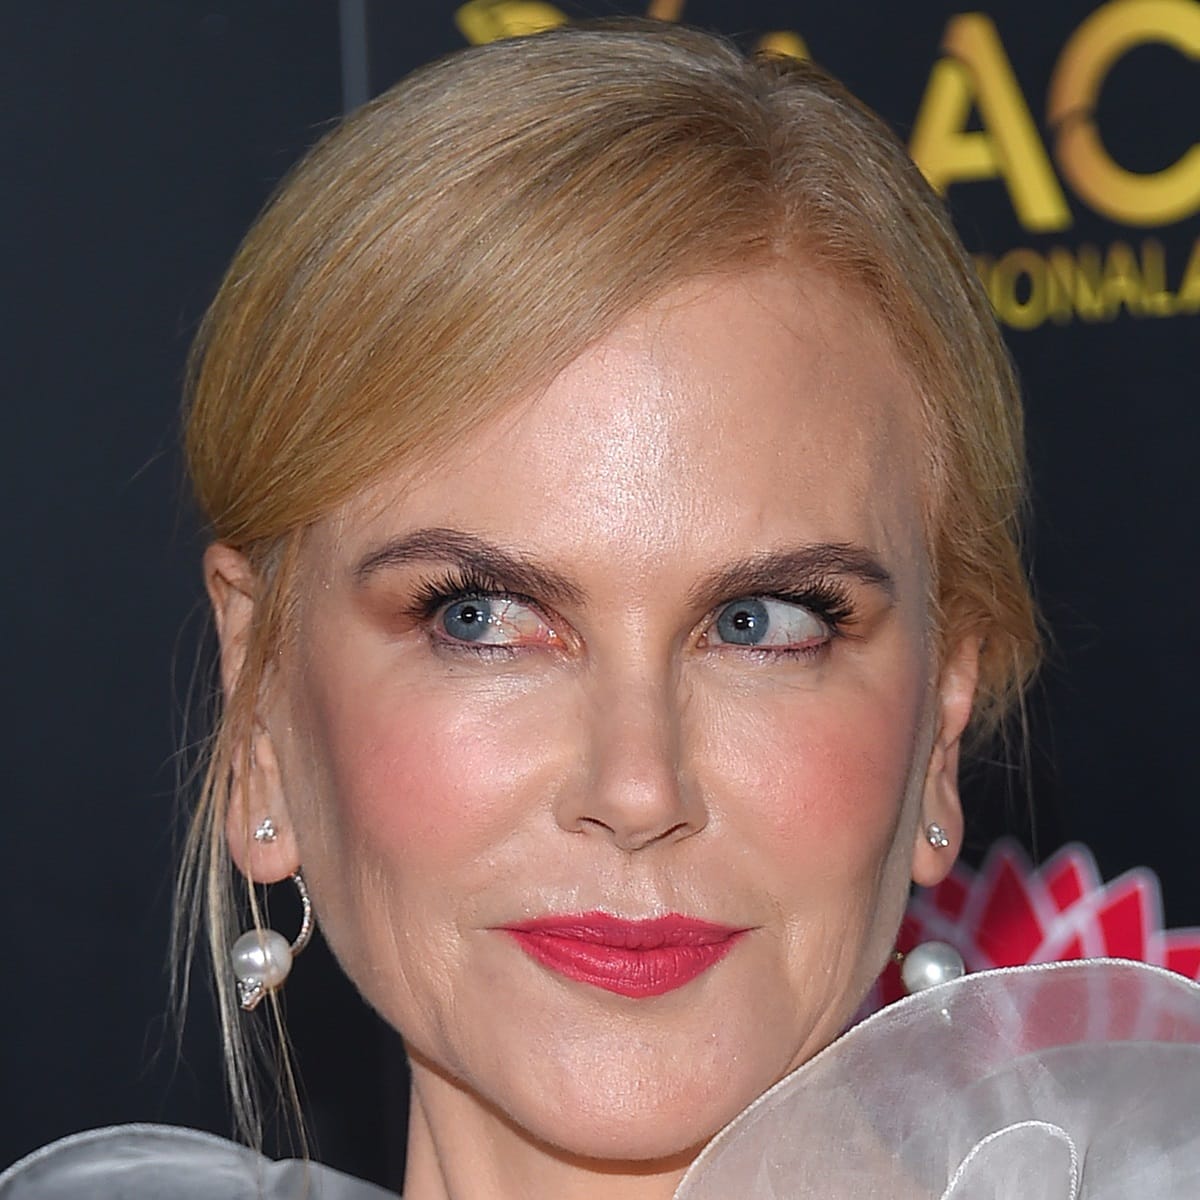 Nicole Kidman has never explicitly admitted to having plastic surgery, but there has been much speculation about whether or not she has had any work done